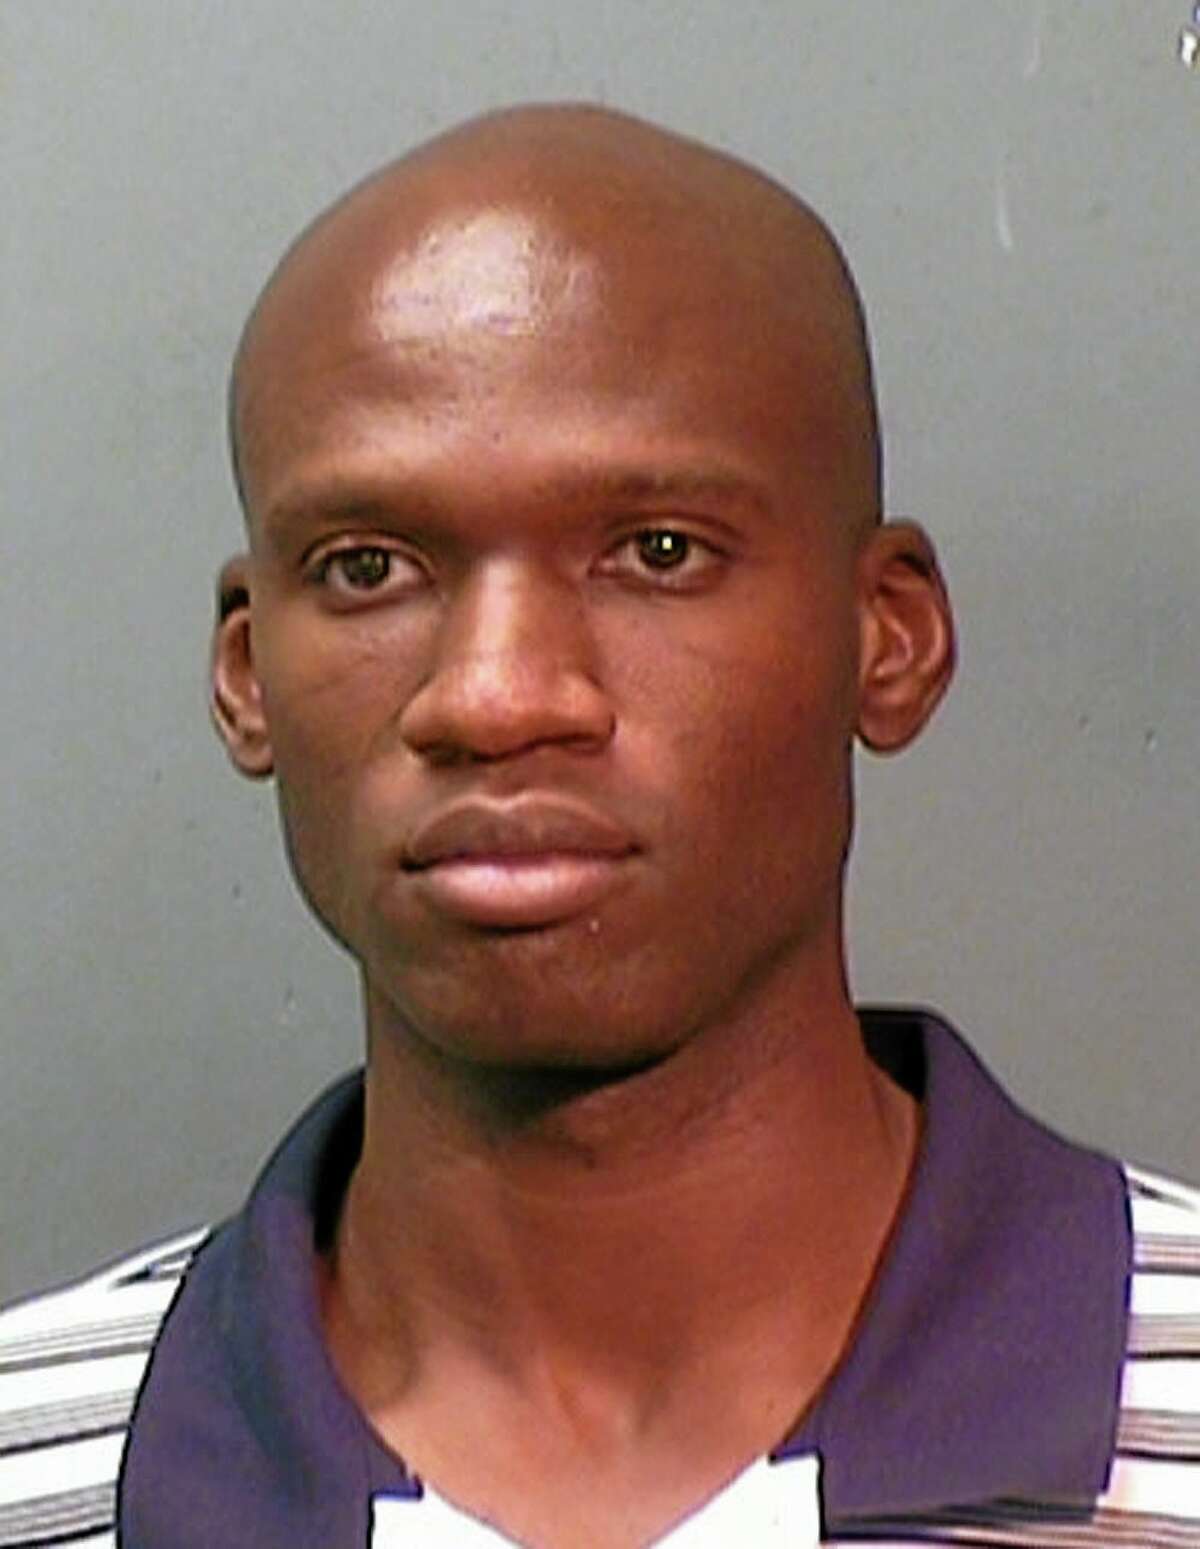 This booking photo provided by the Fort Worth Police Department shows Aaron Alexis, arrested in September, 2010, on suspicion of discharging a firearm in the city limits. The FBI has identified Alexis, 34, as the gunman in the Monday, Sept. 16, 2013 shooting rampage at at the Washington Navy Yard in Washington that left thirteen dead, including himself. (AP Photo/ Fort Worth Police Department)